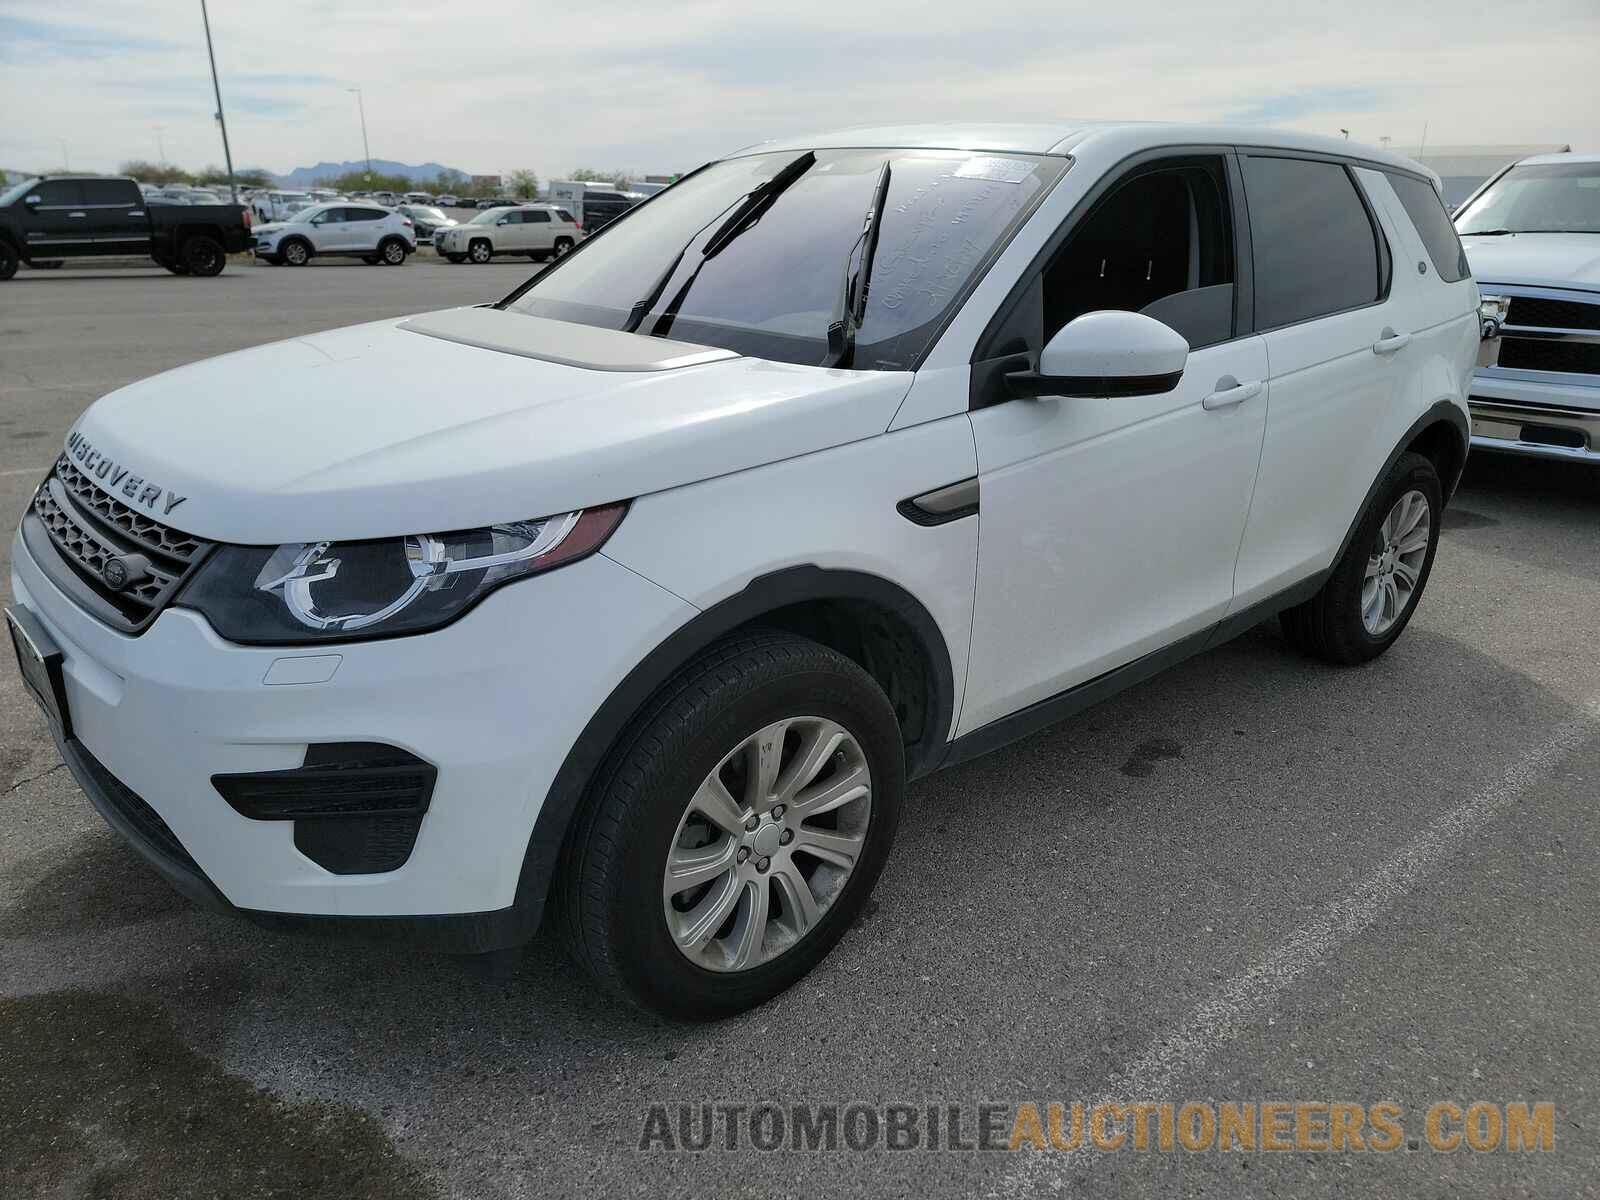 SALCP2RX4JH768709 Land Rover Discovery Sport 2018